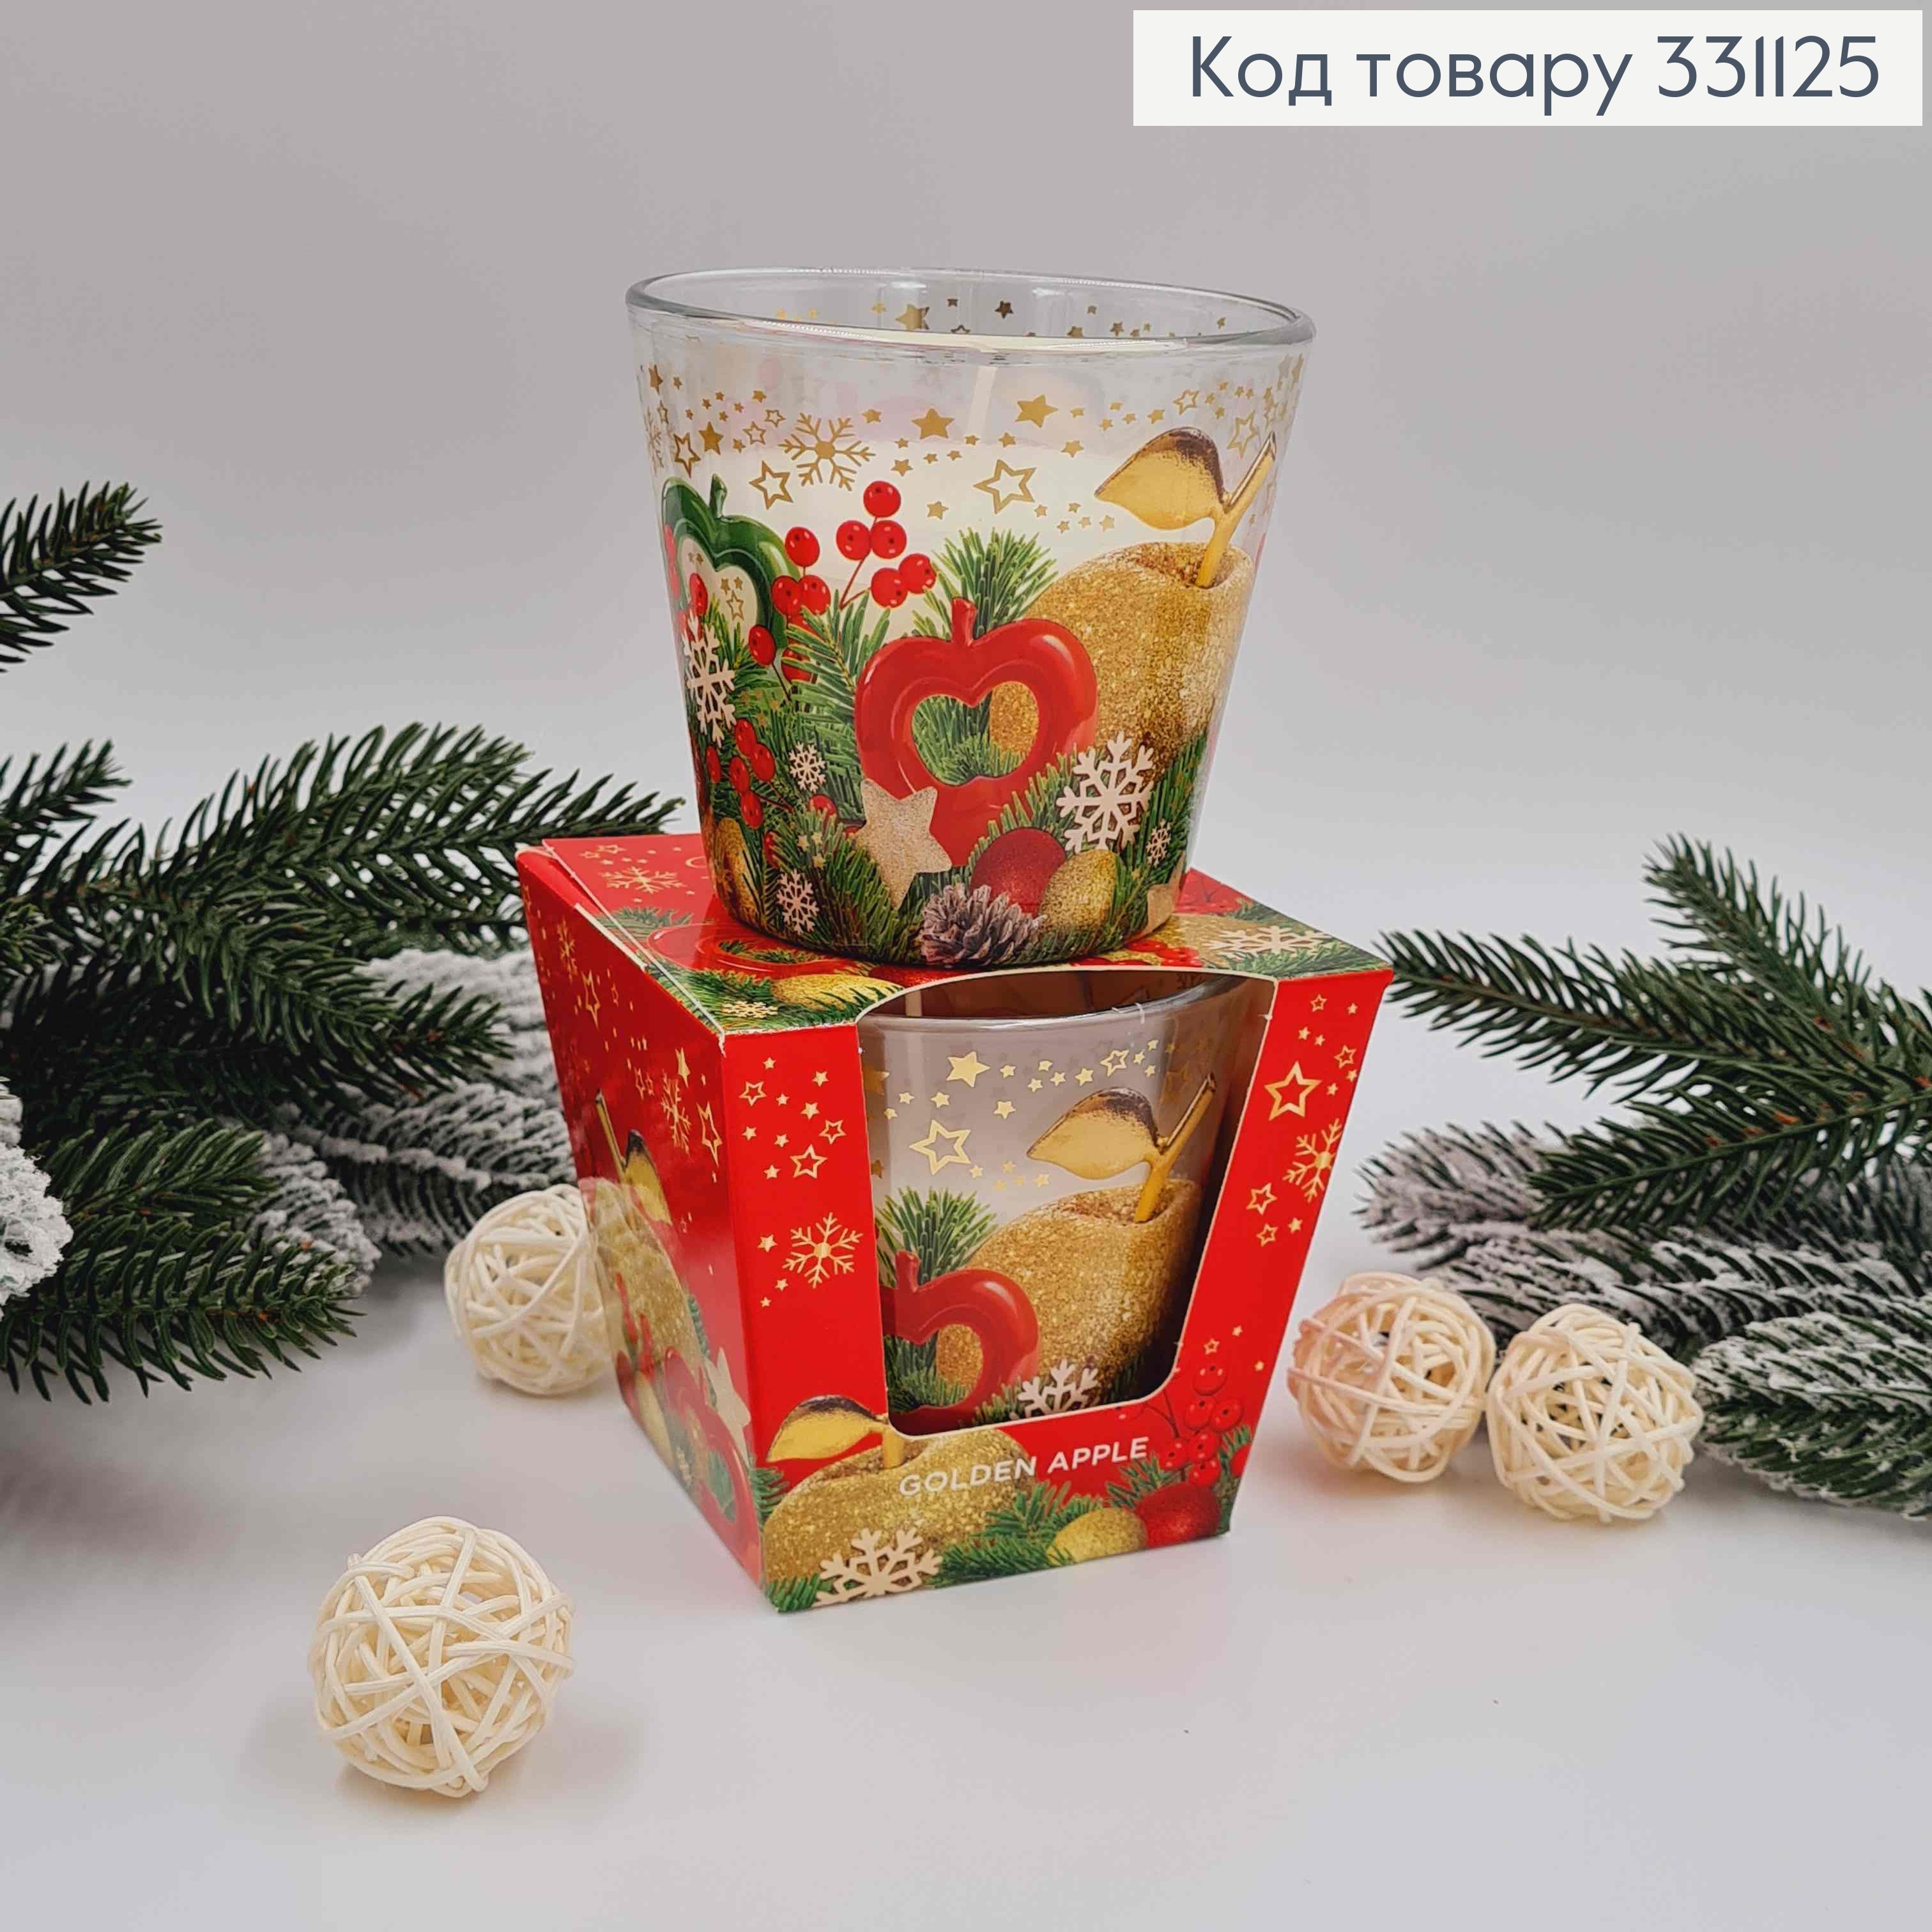 Аромасвечка стакан Christmas Eve (pine, spices, woody and citrus notes) 115г/30год., 331125 фото 2